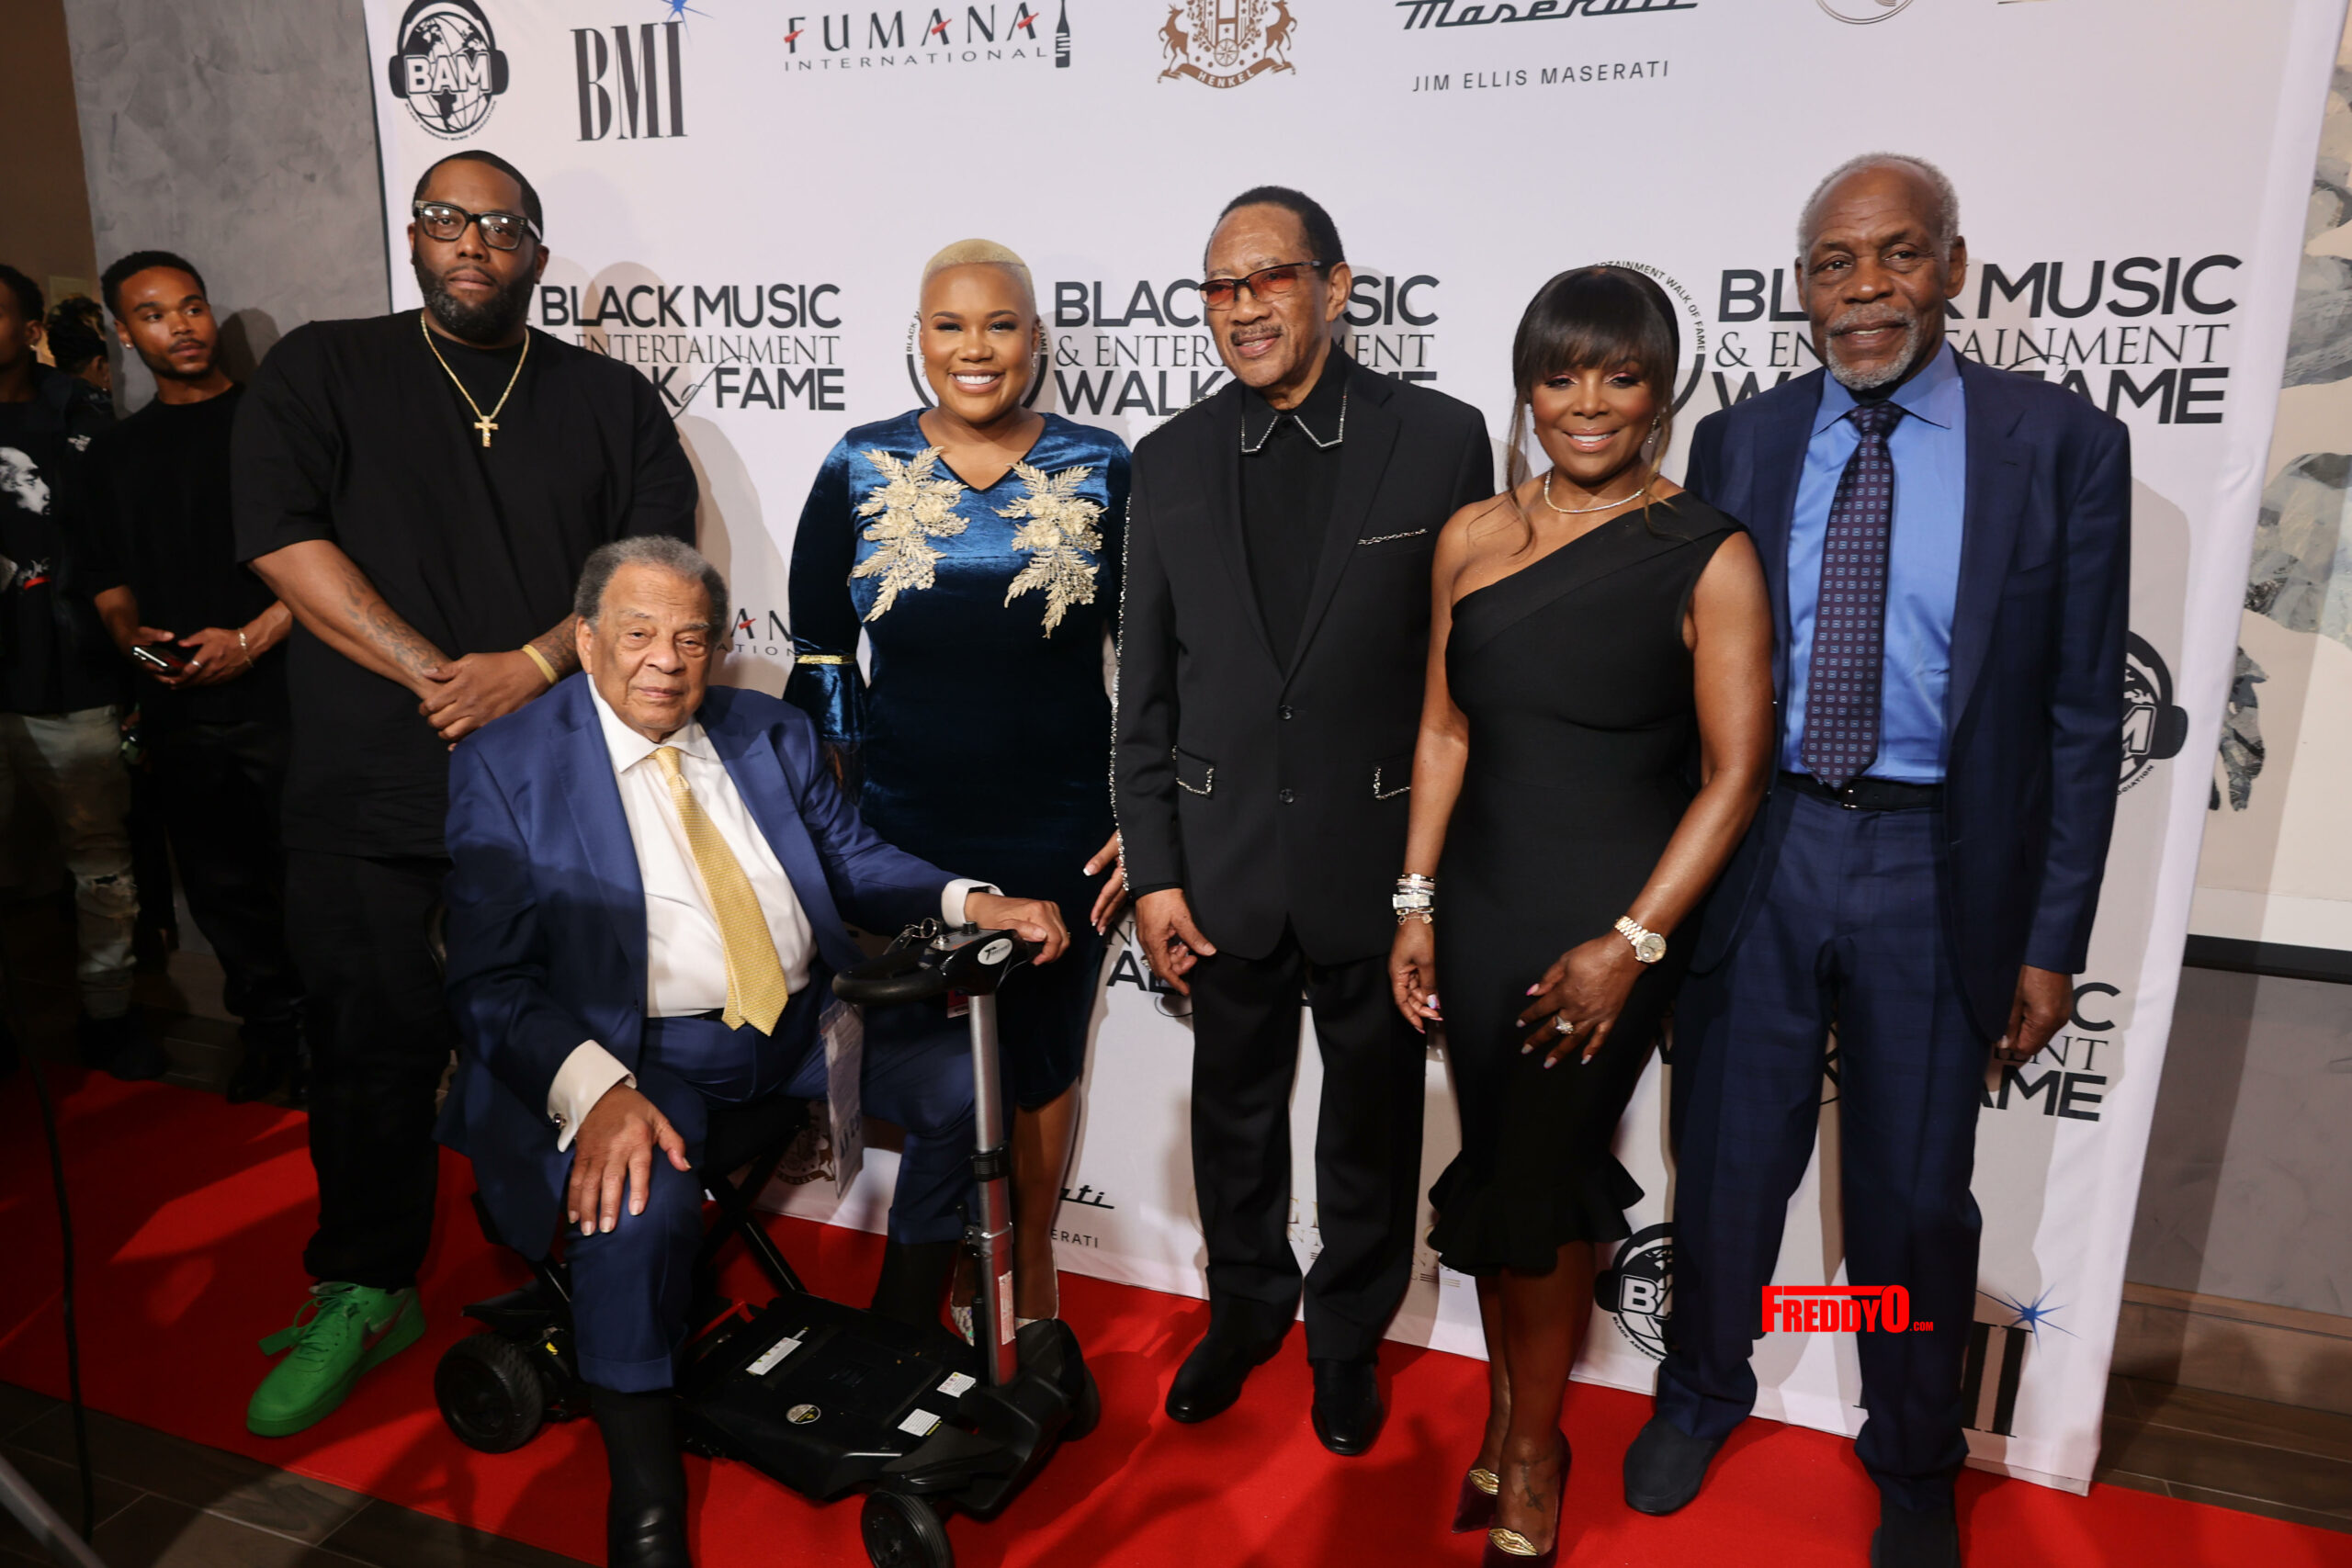 Ambassador Andrew Young, Danny Glover, and Dr. Bobby Jones was all honored at the Black Music & Entertainment Walk of Fame Black History Month Induction Ceremony and Brunch Celebration.